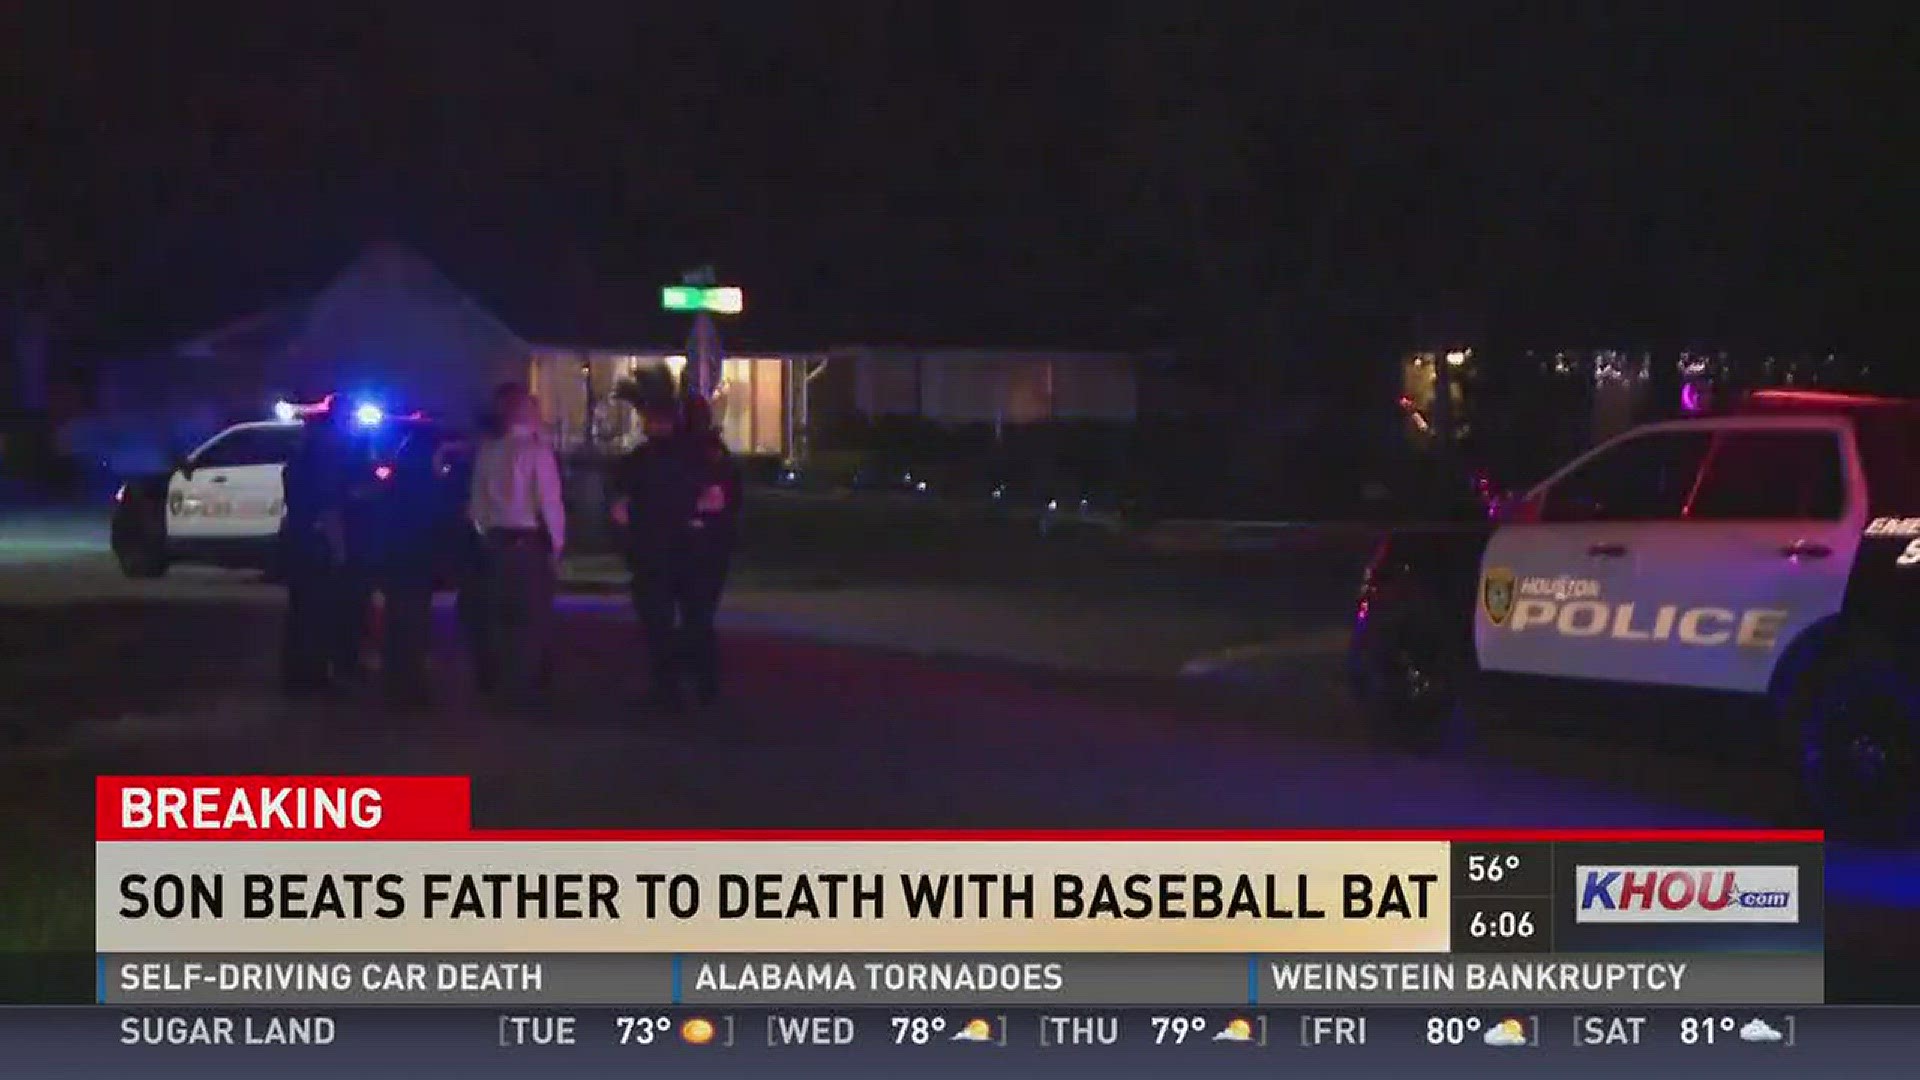 A late-night argument turned deadly after police say a son beat his father to death with a baseball bat.